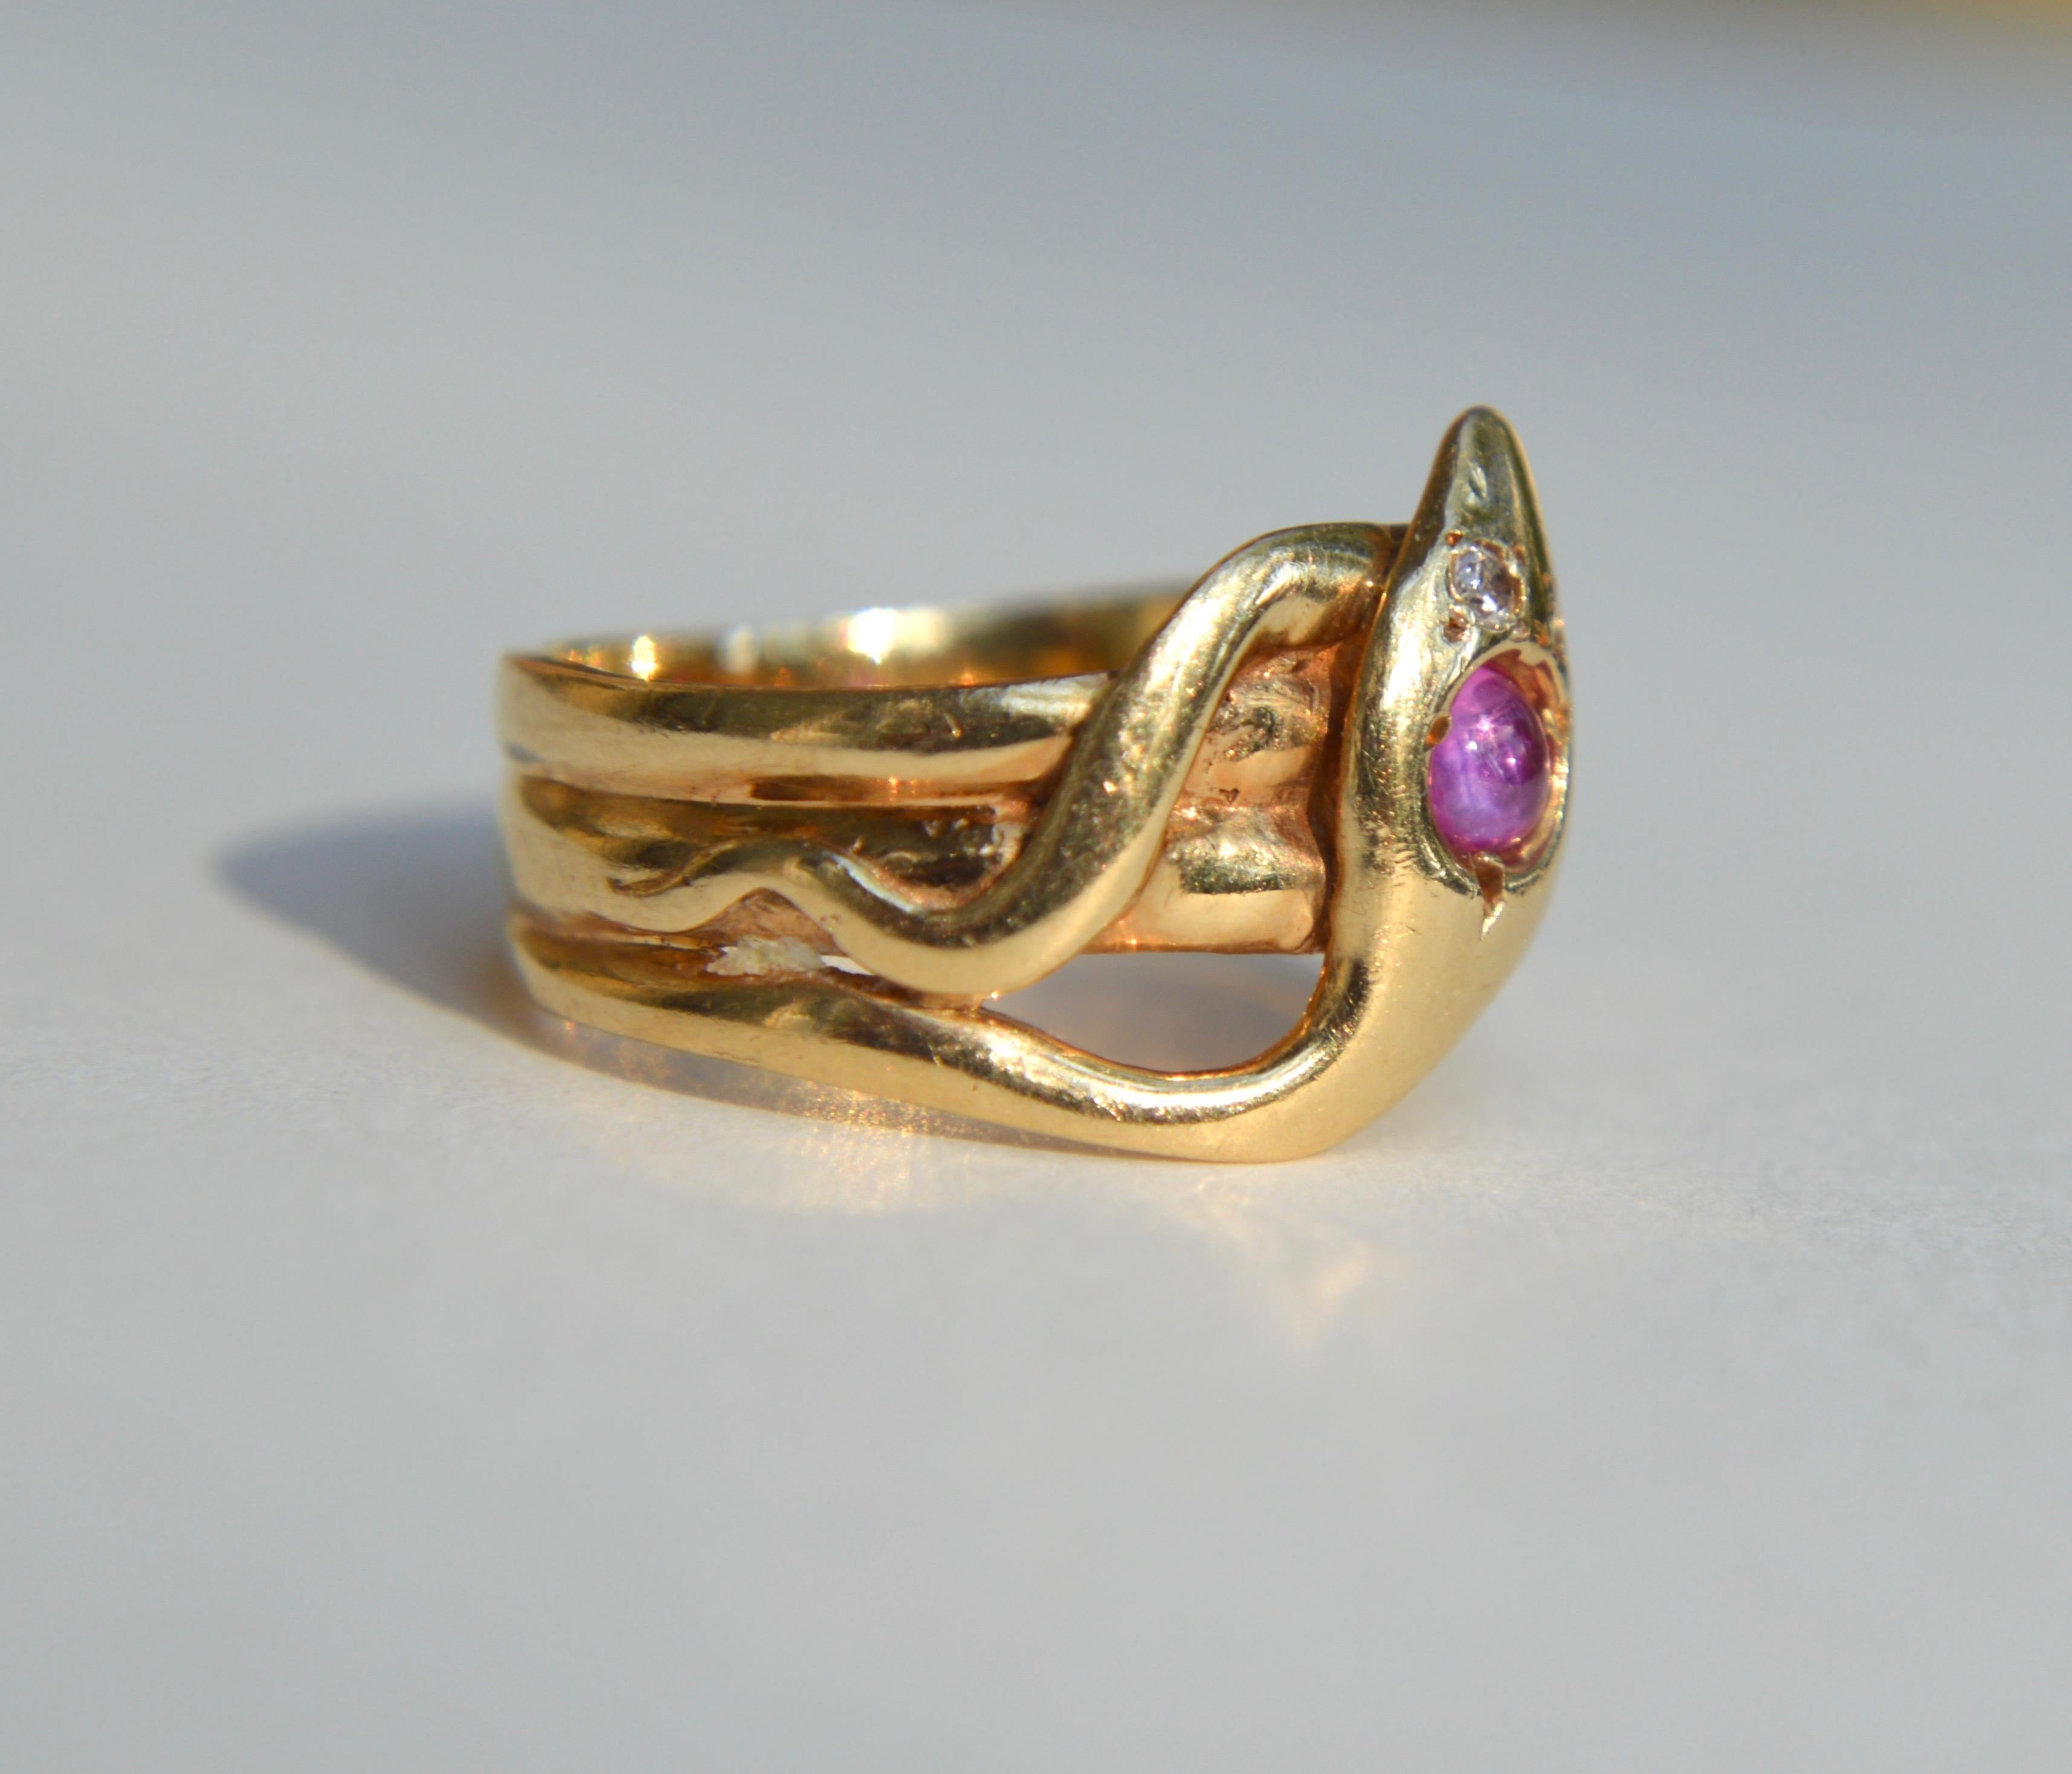 Gorgeous antique Victorian era late 1800s 14K yellow gold with pink sapphire cabochon and round cut diamond snake ring. Size 6.25, not recommended for resizing due to the ribbed band. In good condition. Sapphire cabochon measures 3mm diameter, 0.11